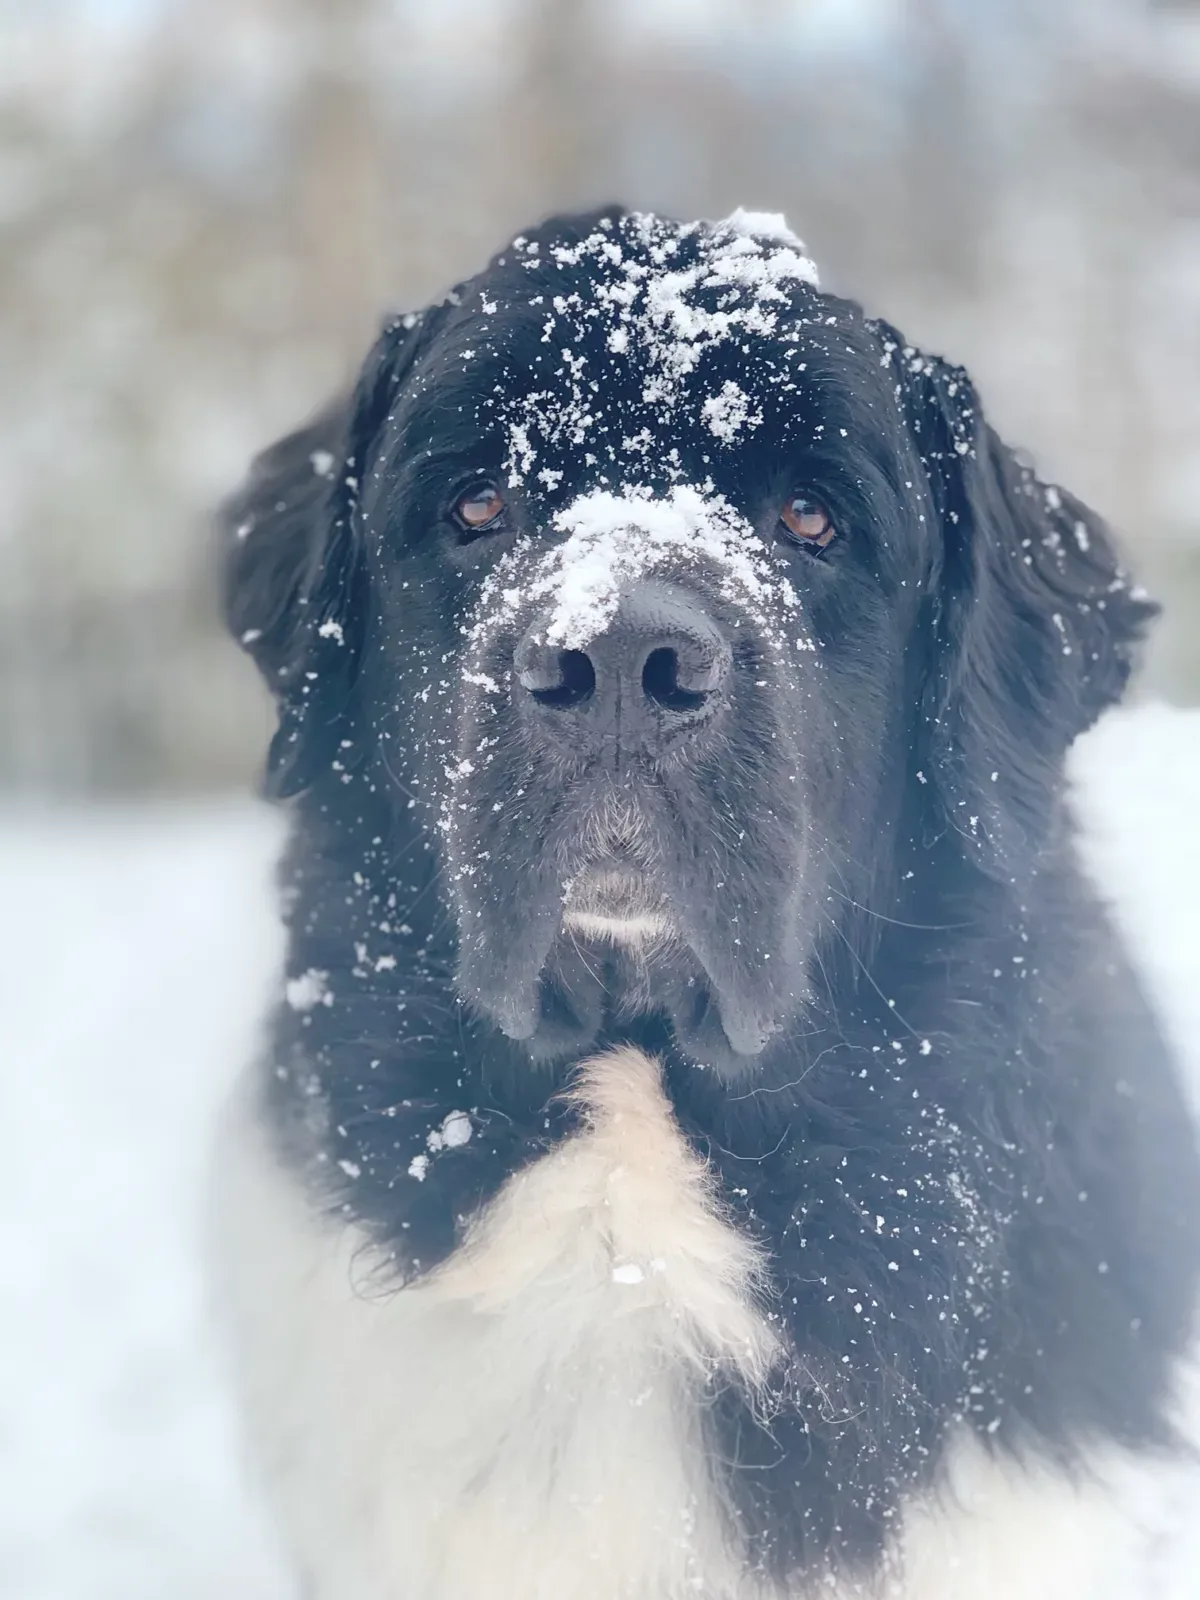 Is It Safe For Dogs To Eat Snow?